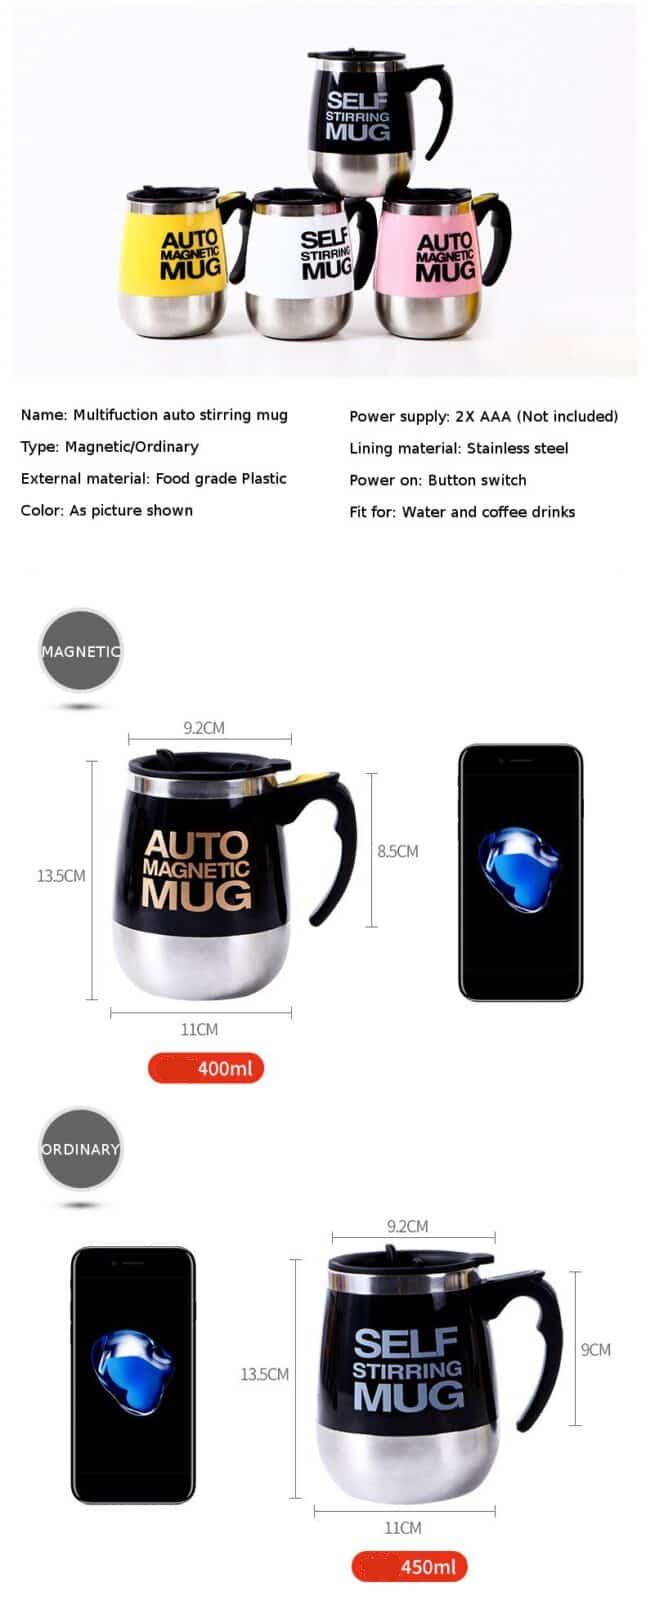 Auto Magnetic Mug Stainless Steel Self Sterring Coffee Milk Mixing Mug Automatic Electric Lazy Smart Shaker Coffee Juice Mix Cup